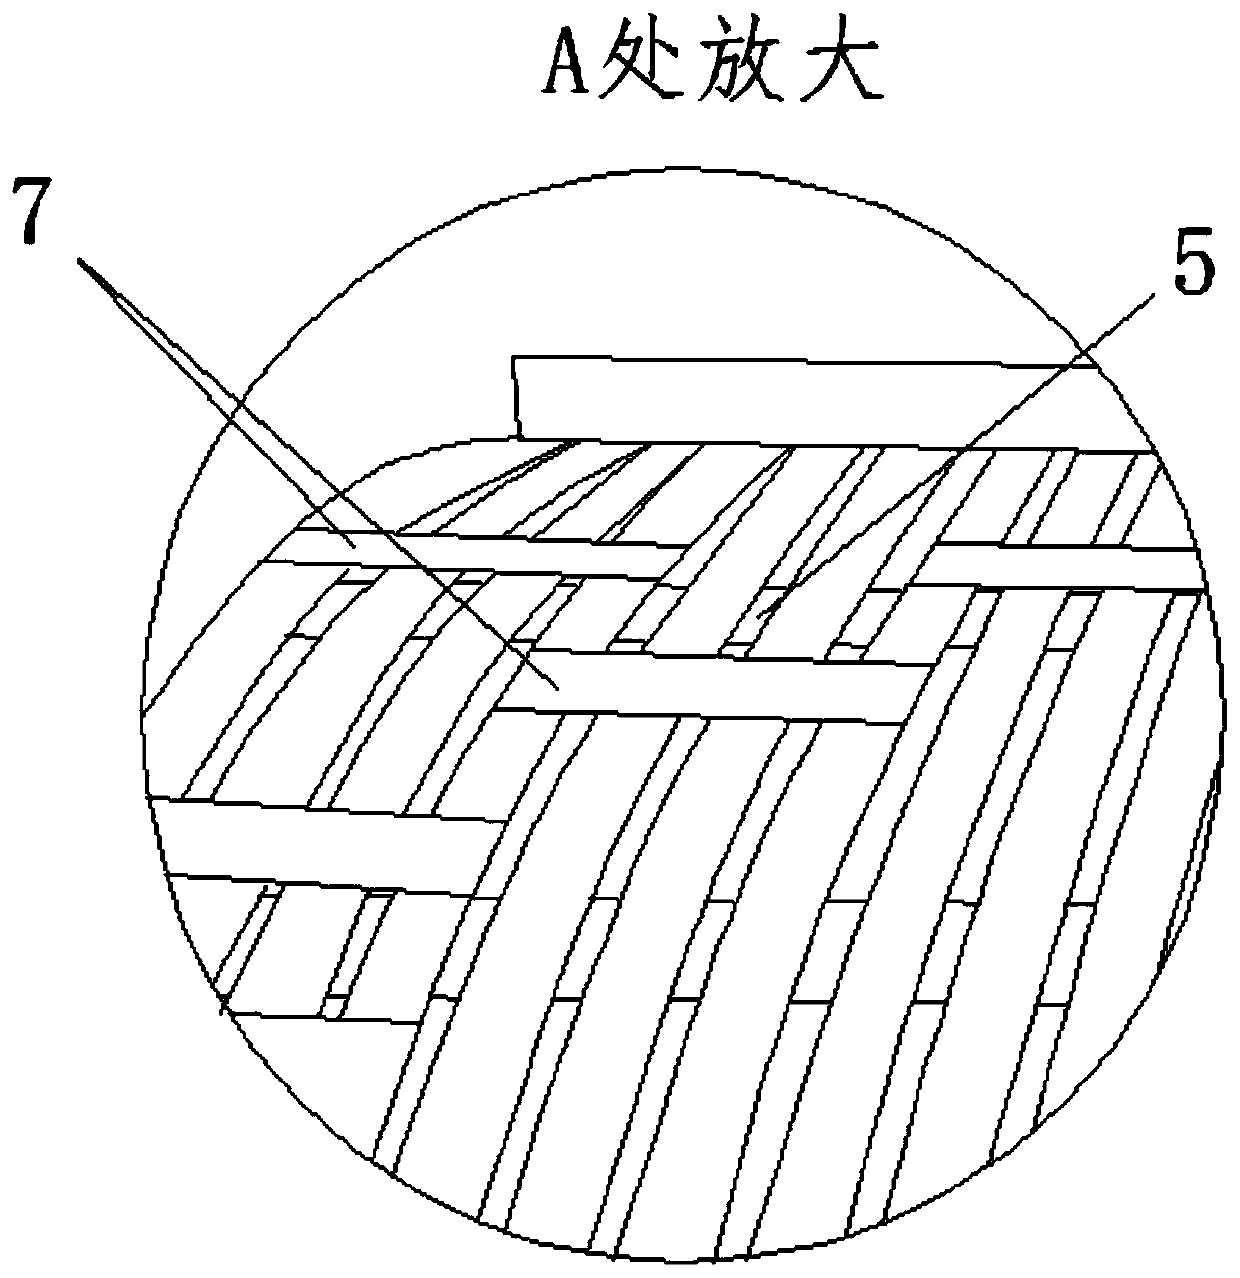 A winding and binding process of transformer spiral coil